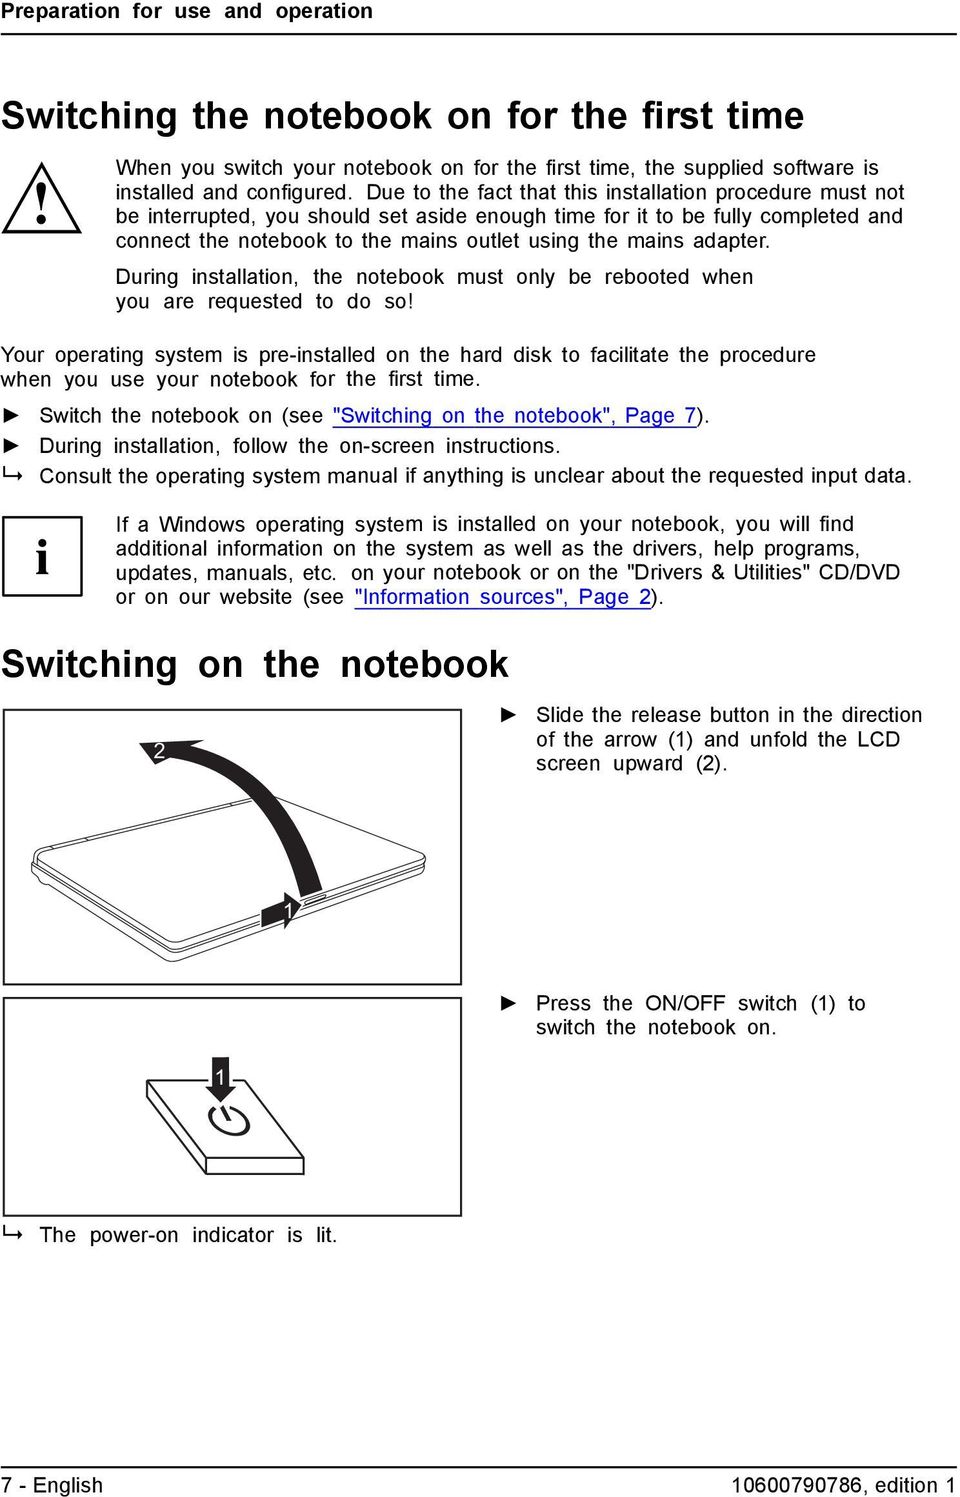 Due to the fact that this installation procedure must not be interrupted, you should set aside enough time for it to be fully completed and connect the notebook to the mains outlet using the mains